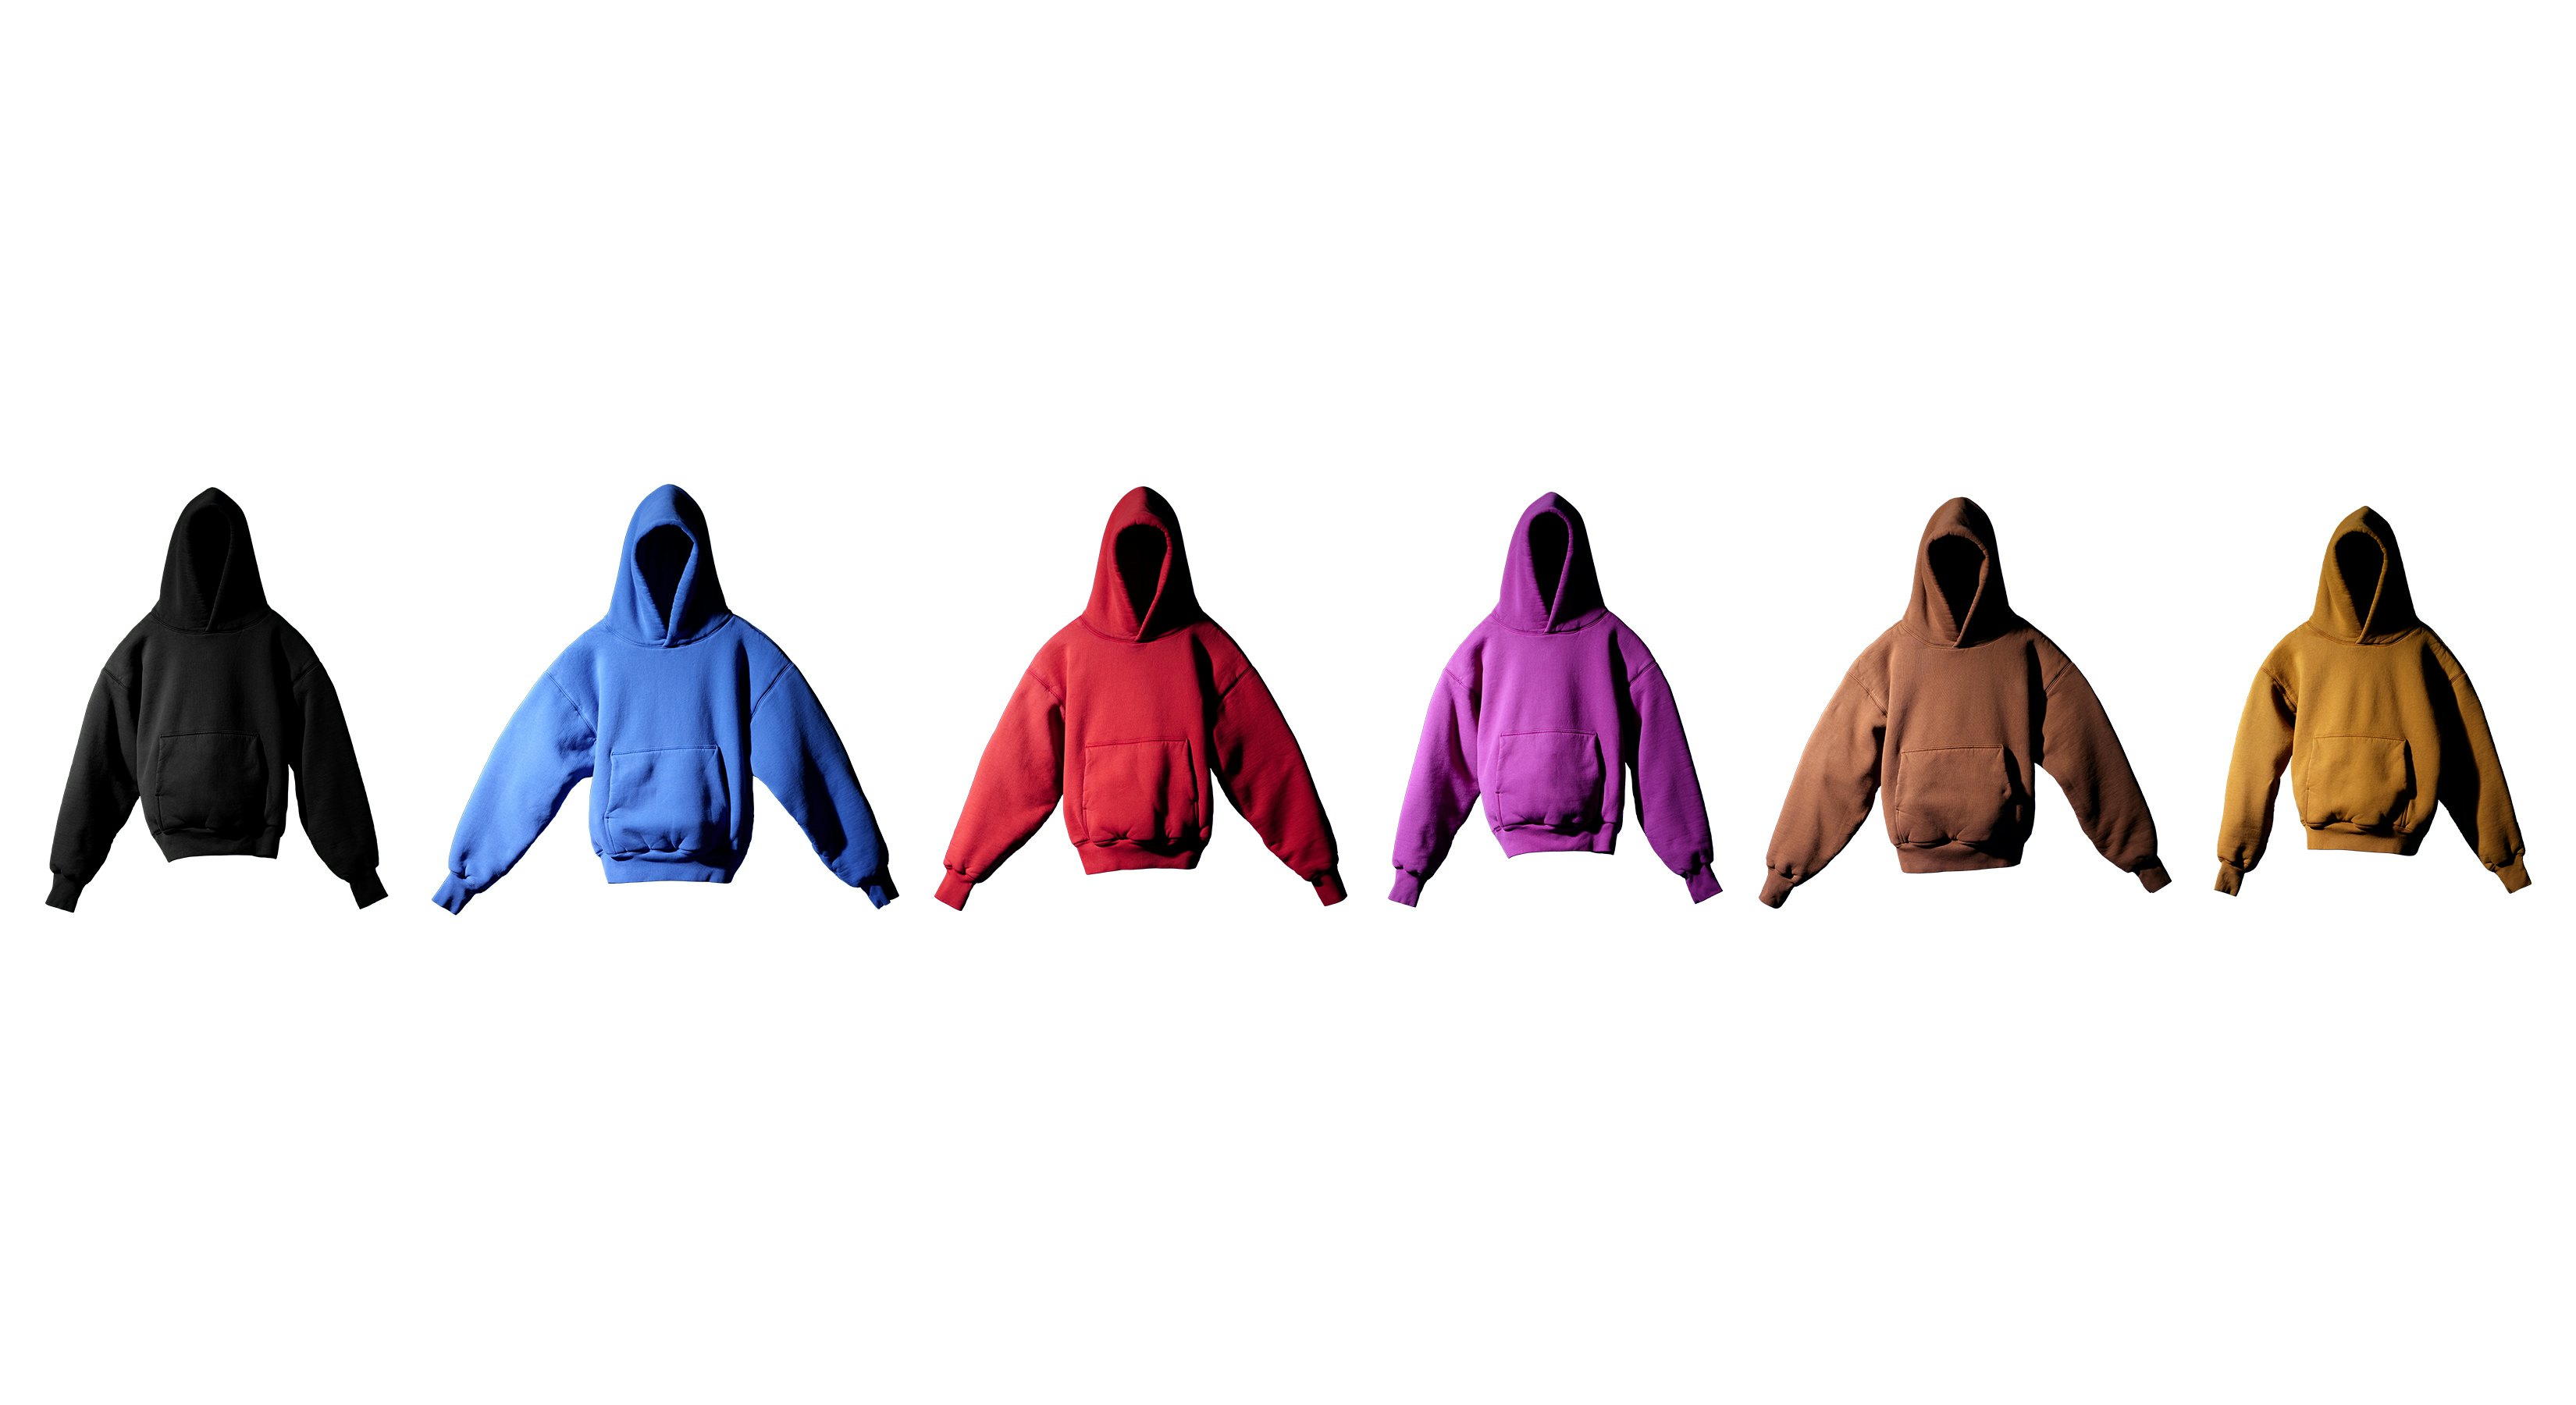 Yeezy Gap launches its first hoodies — and they're flying fast